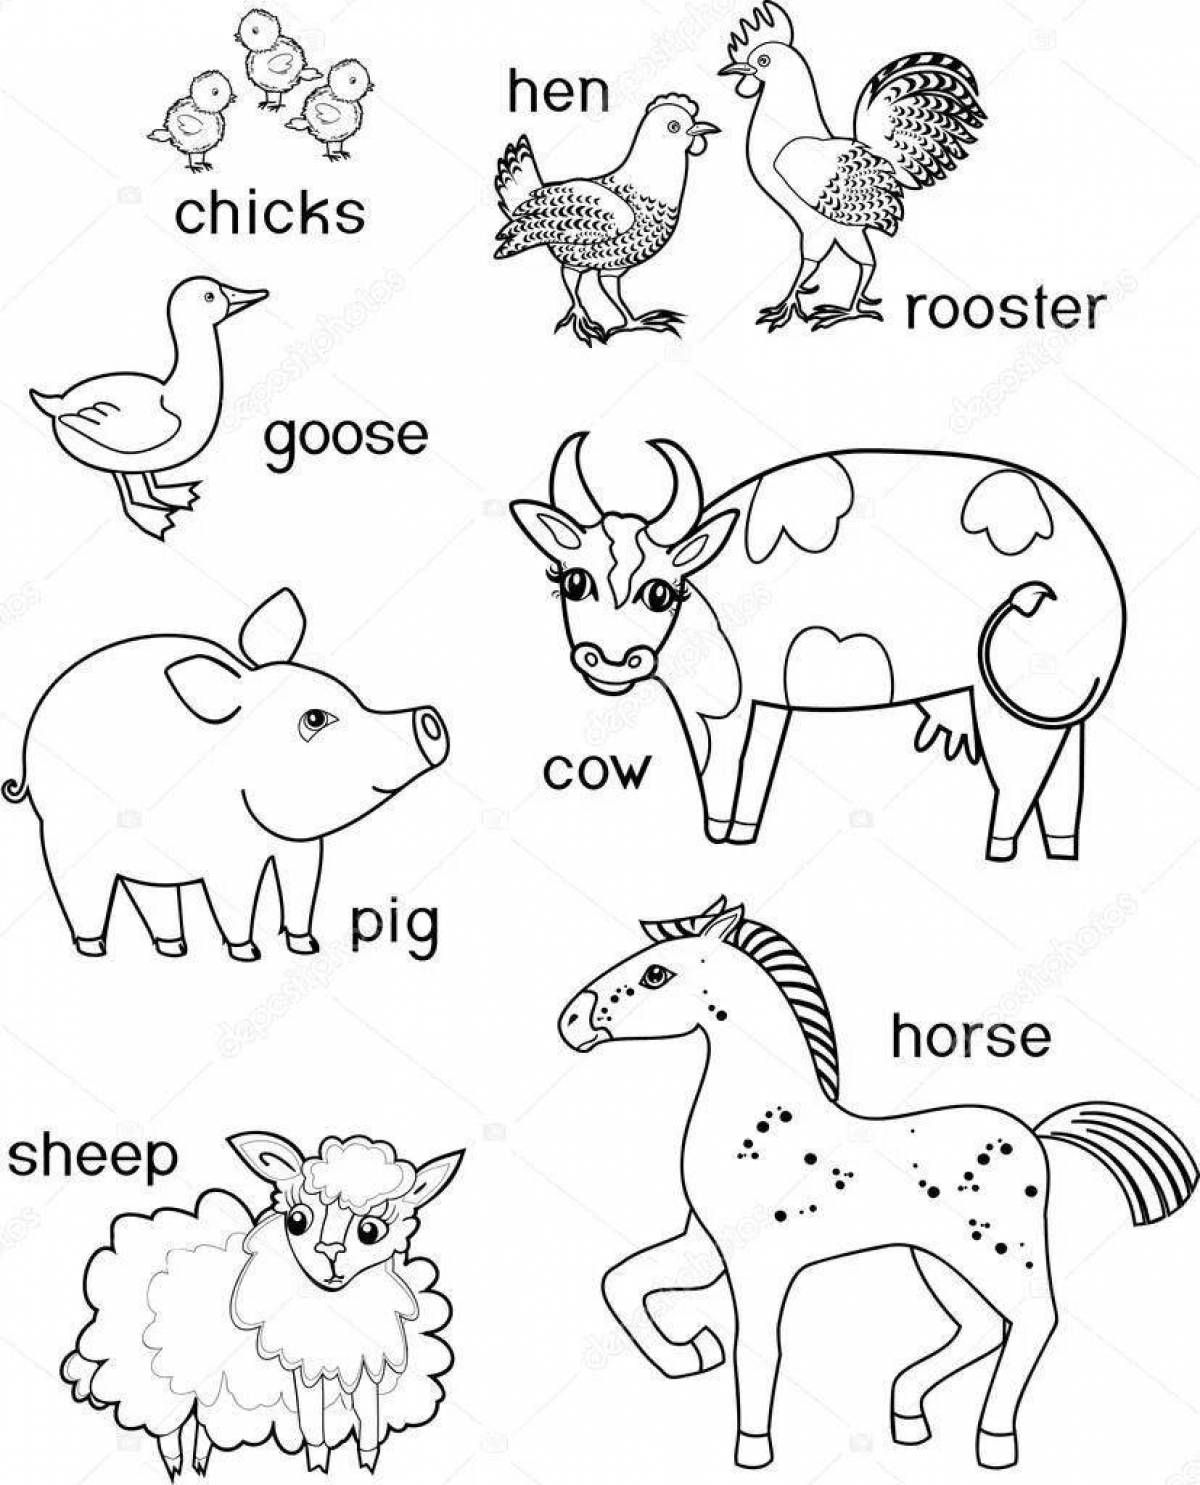 Perfect english animal coloring page for babies